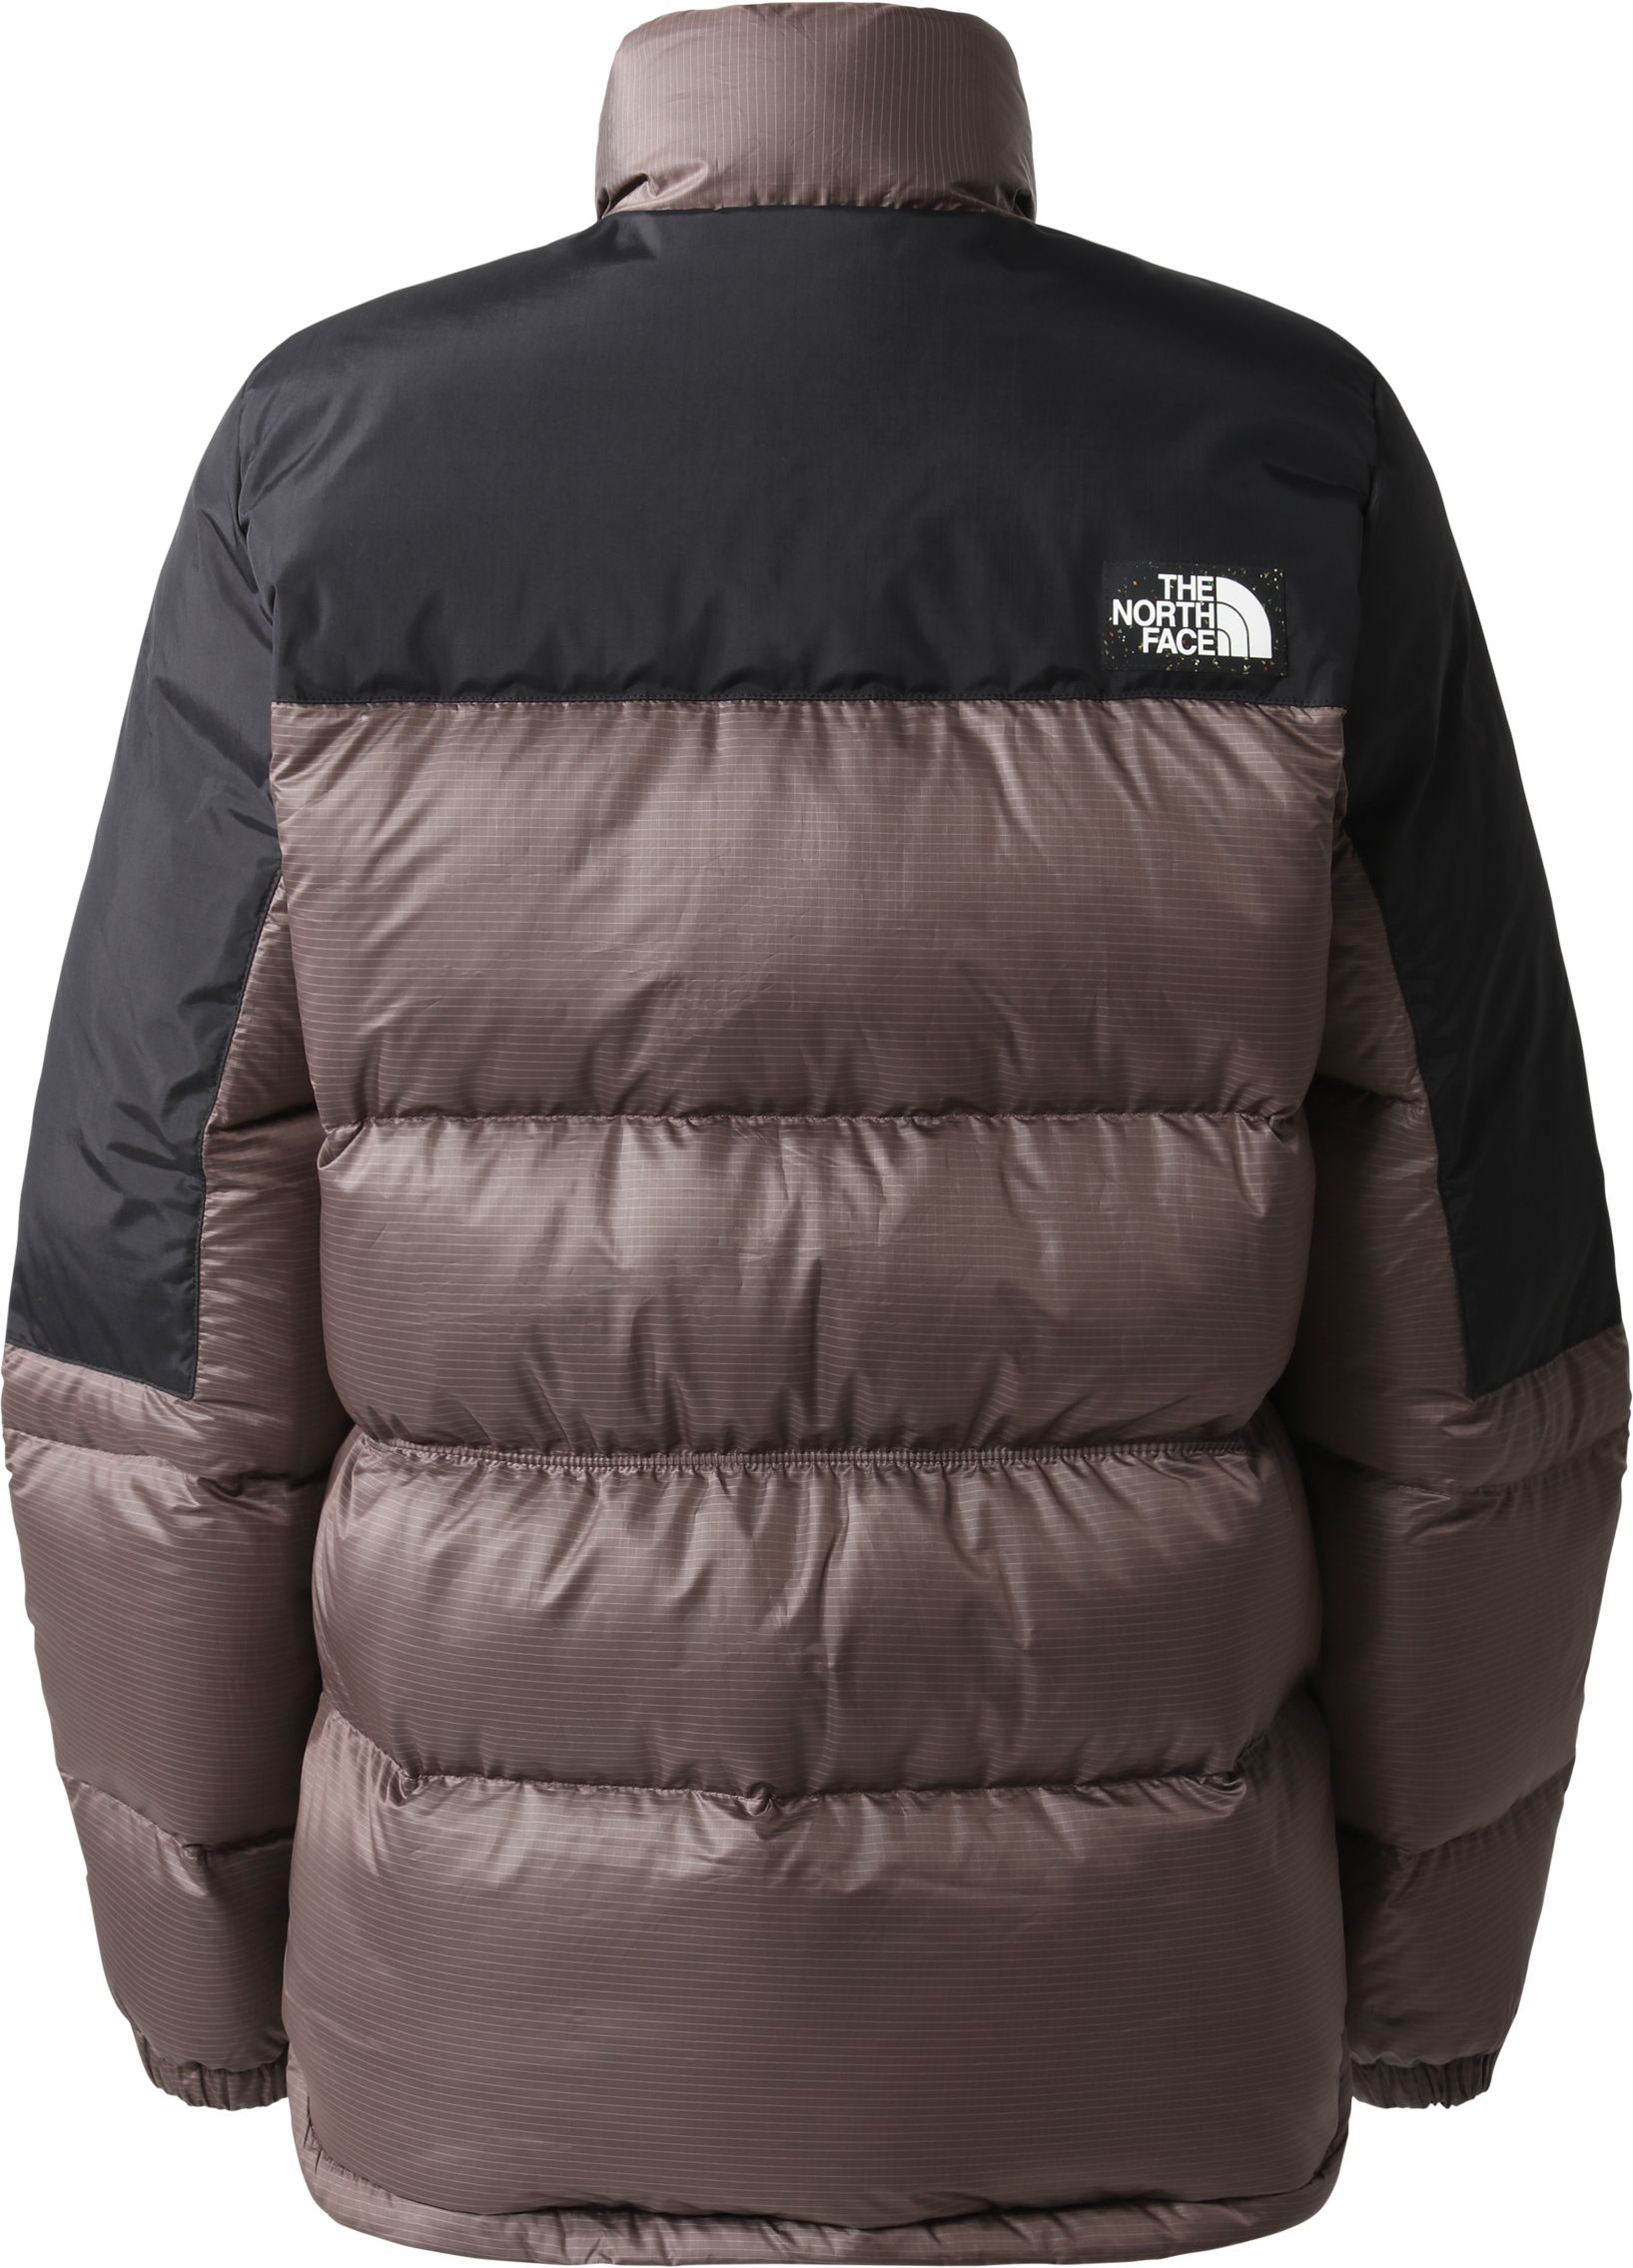 THE NORTH FACE, W DIABLO RECYCLED DOWN JACKET